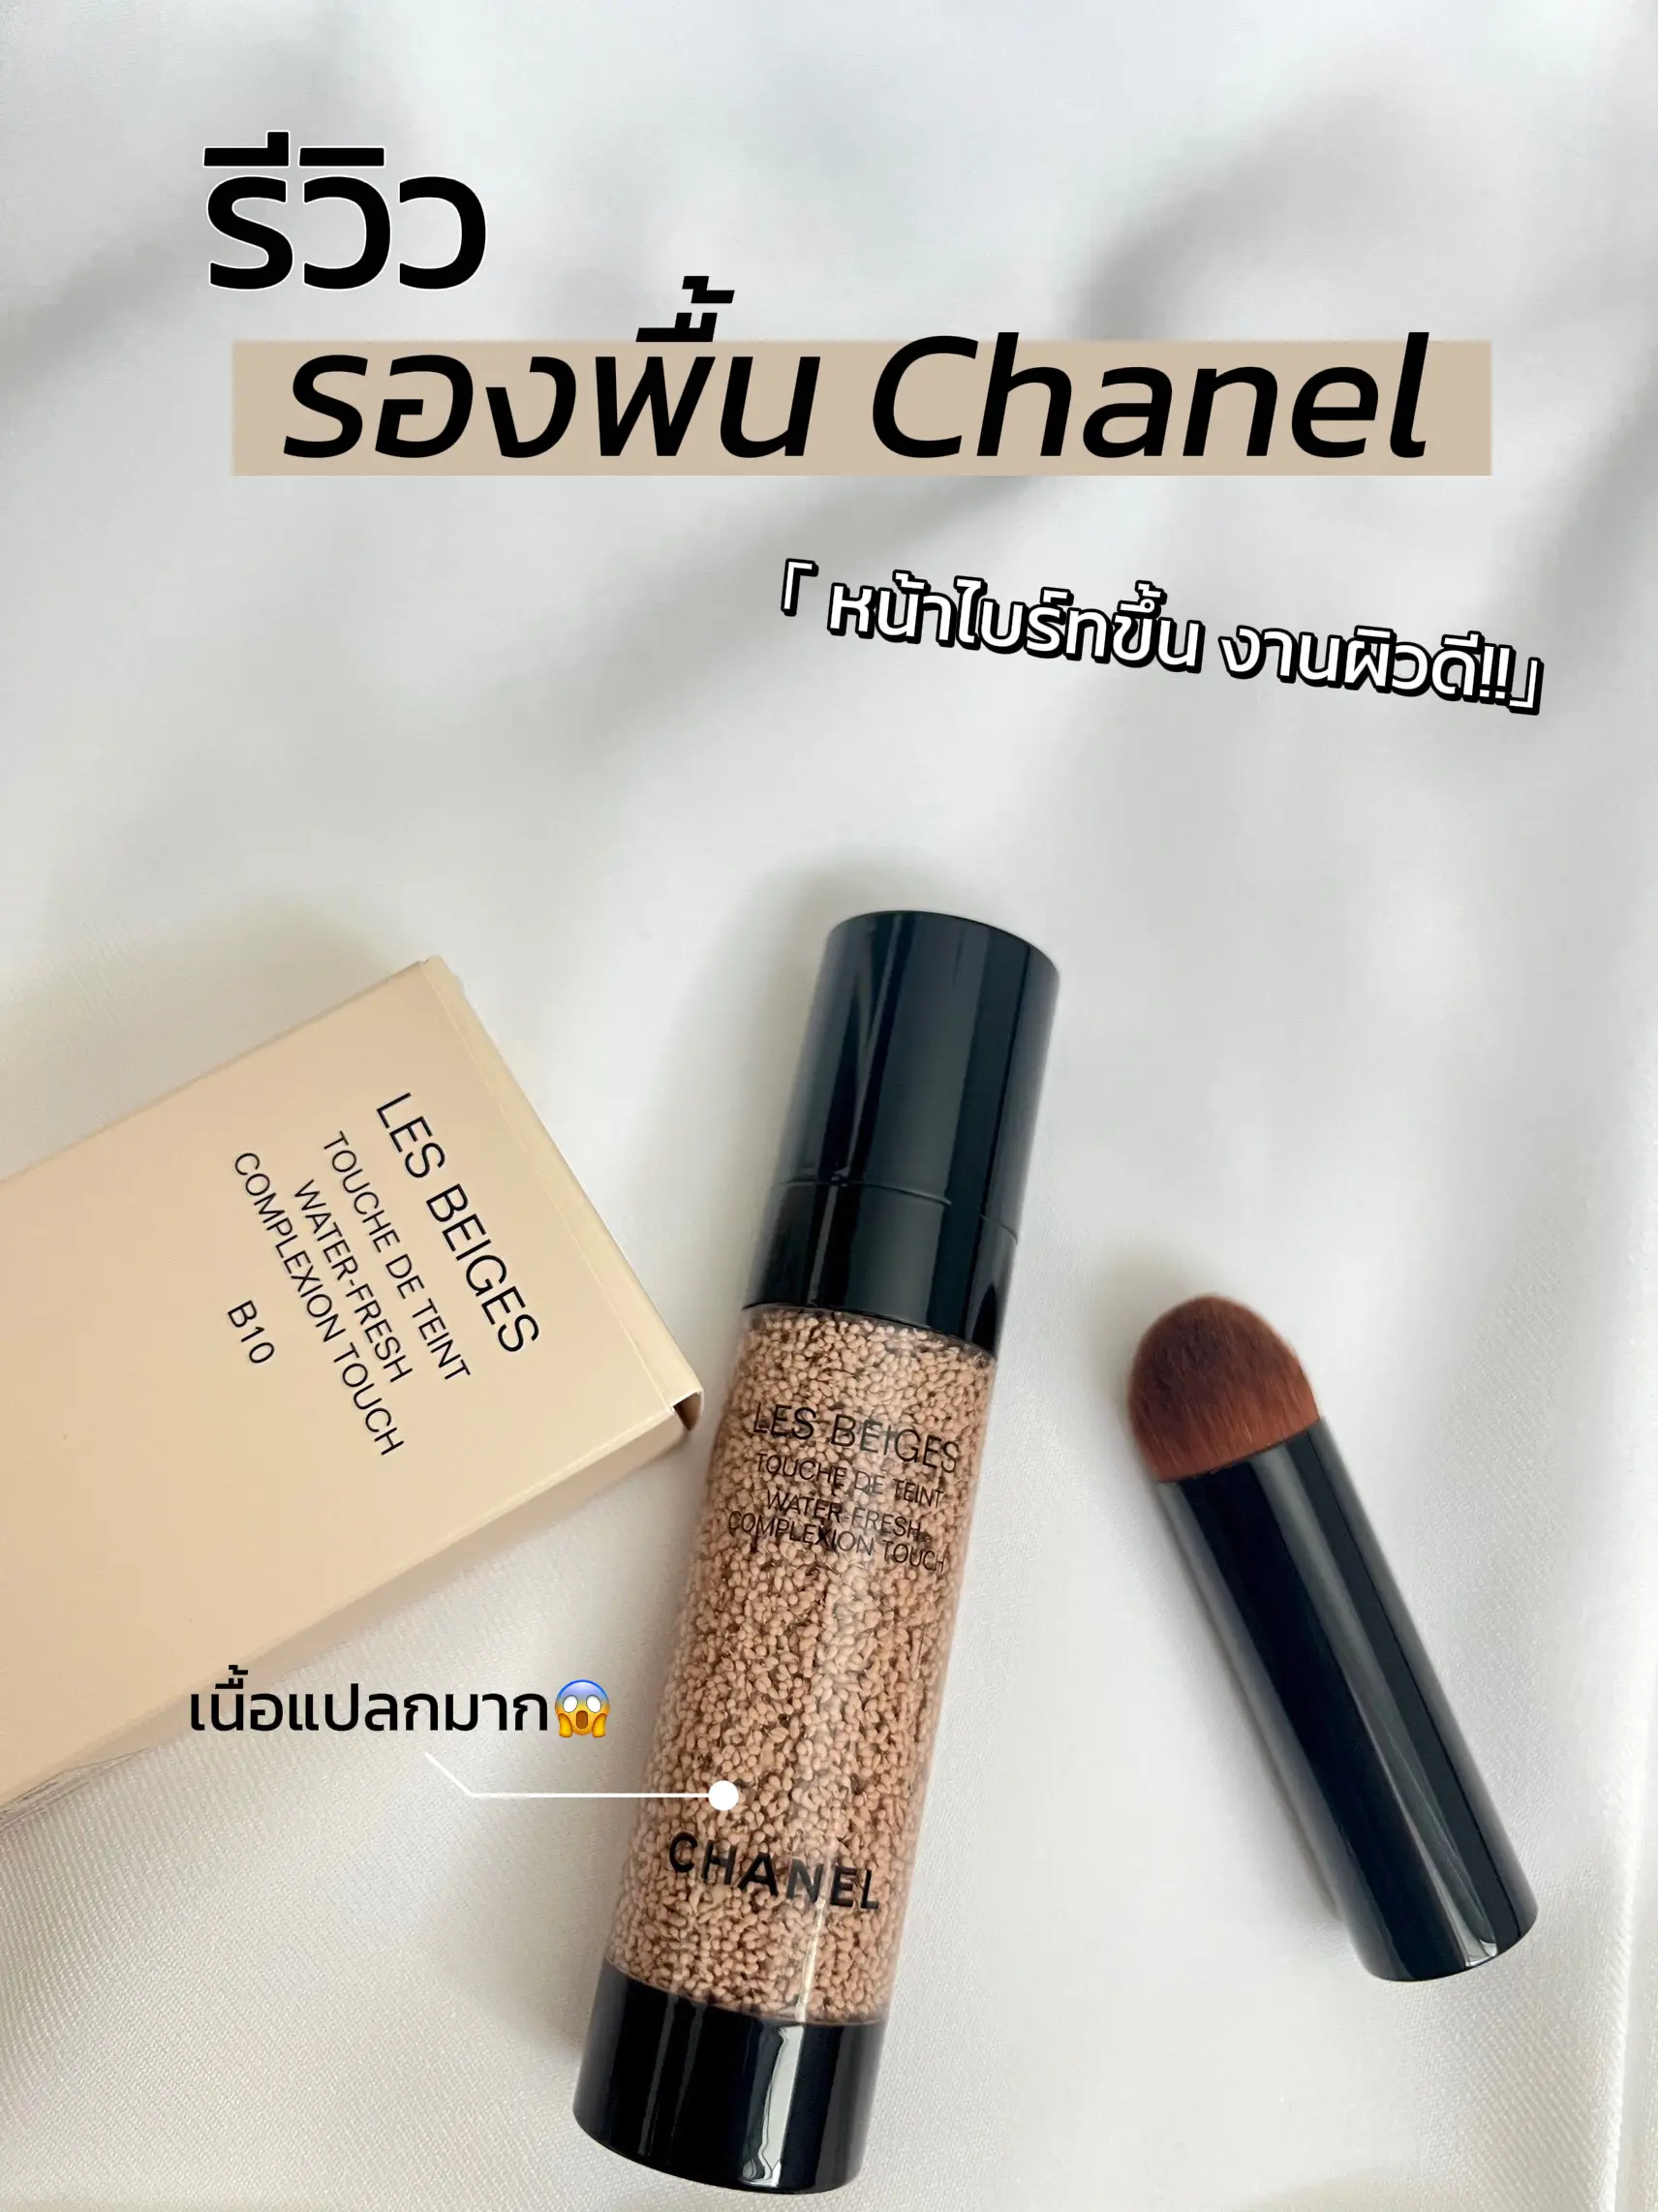 CHANEL LES BEIGES WATER FRESH COMPLEXION TOUCH